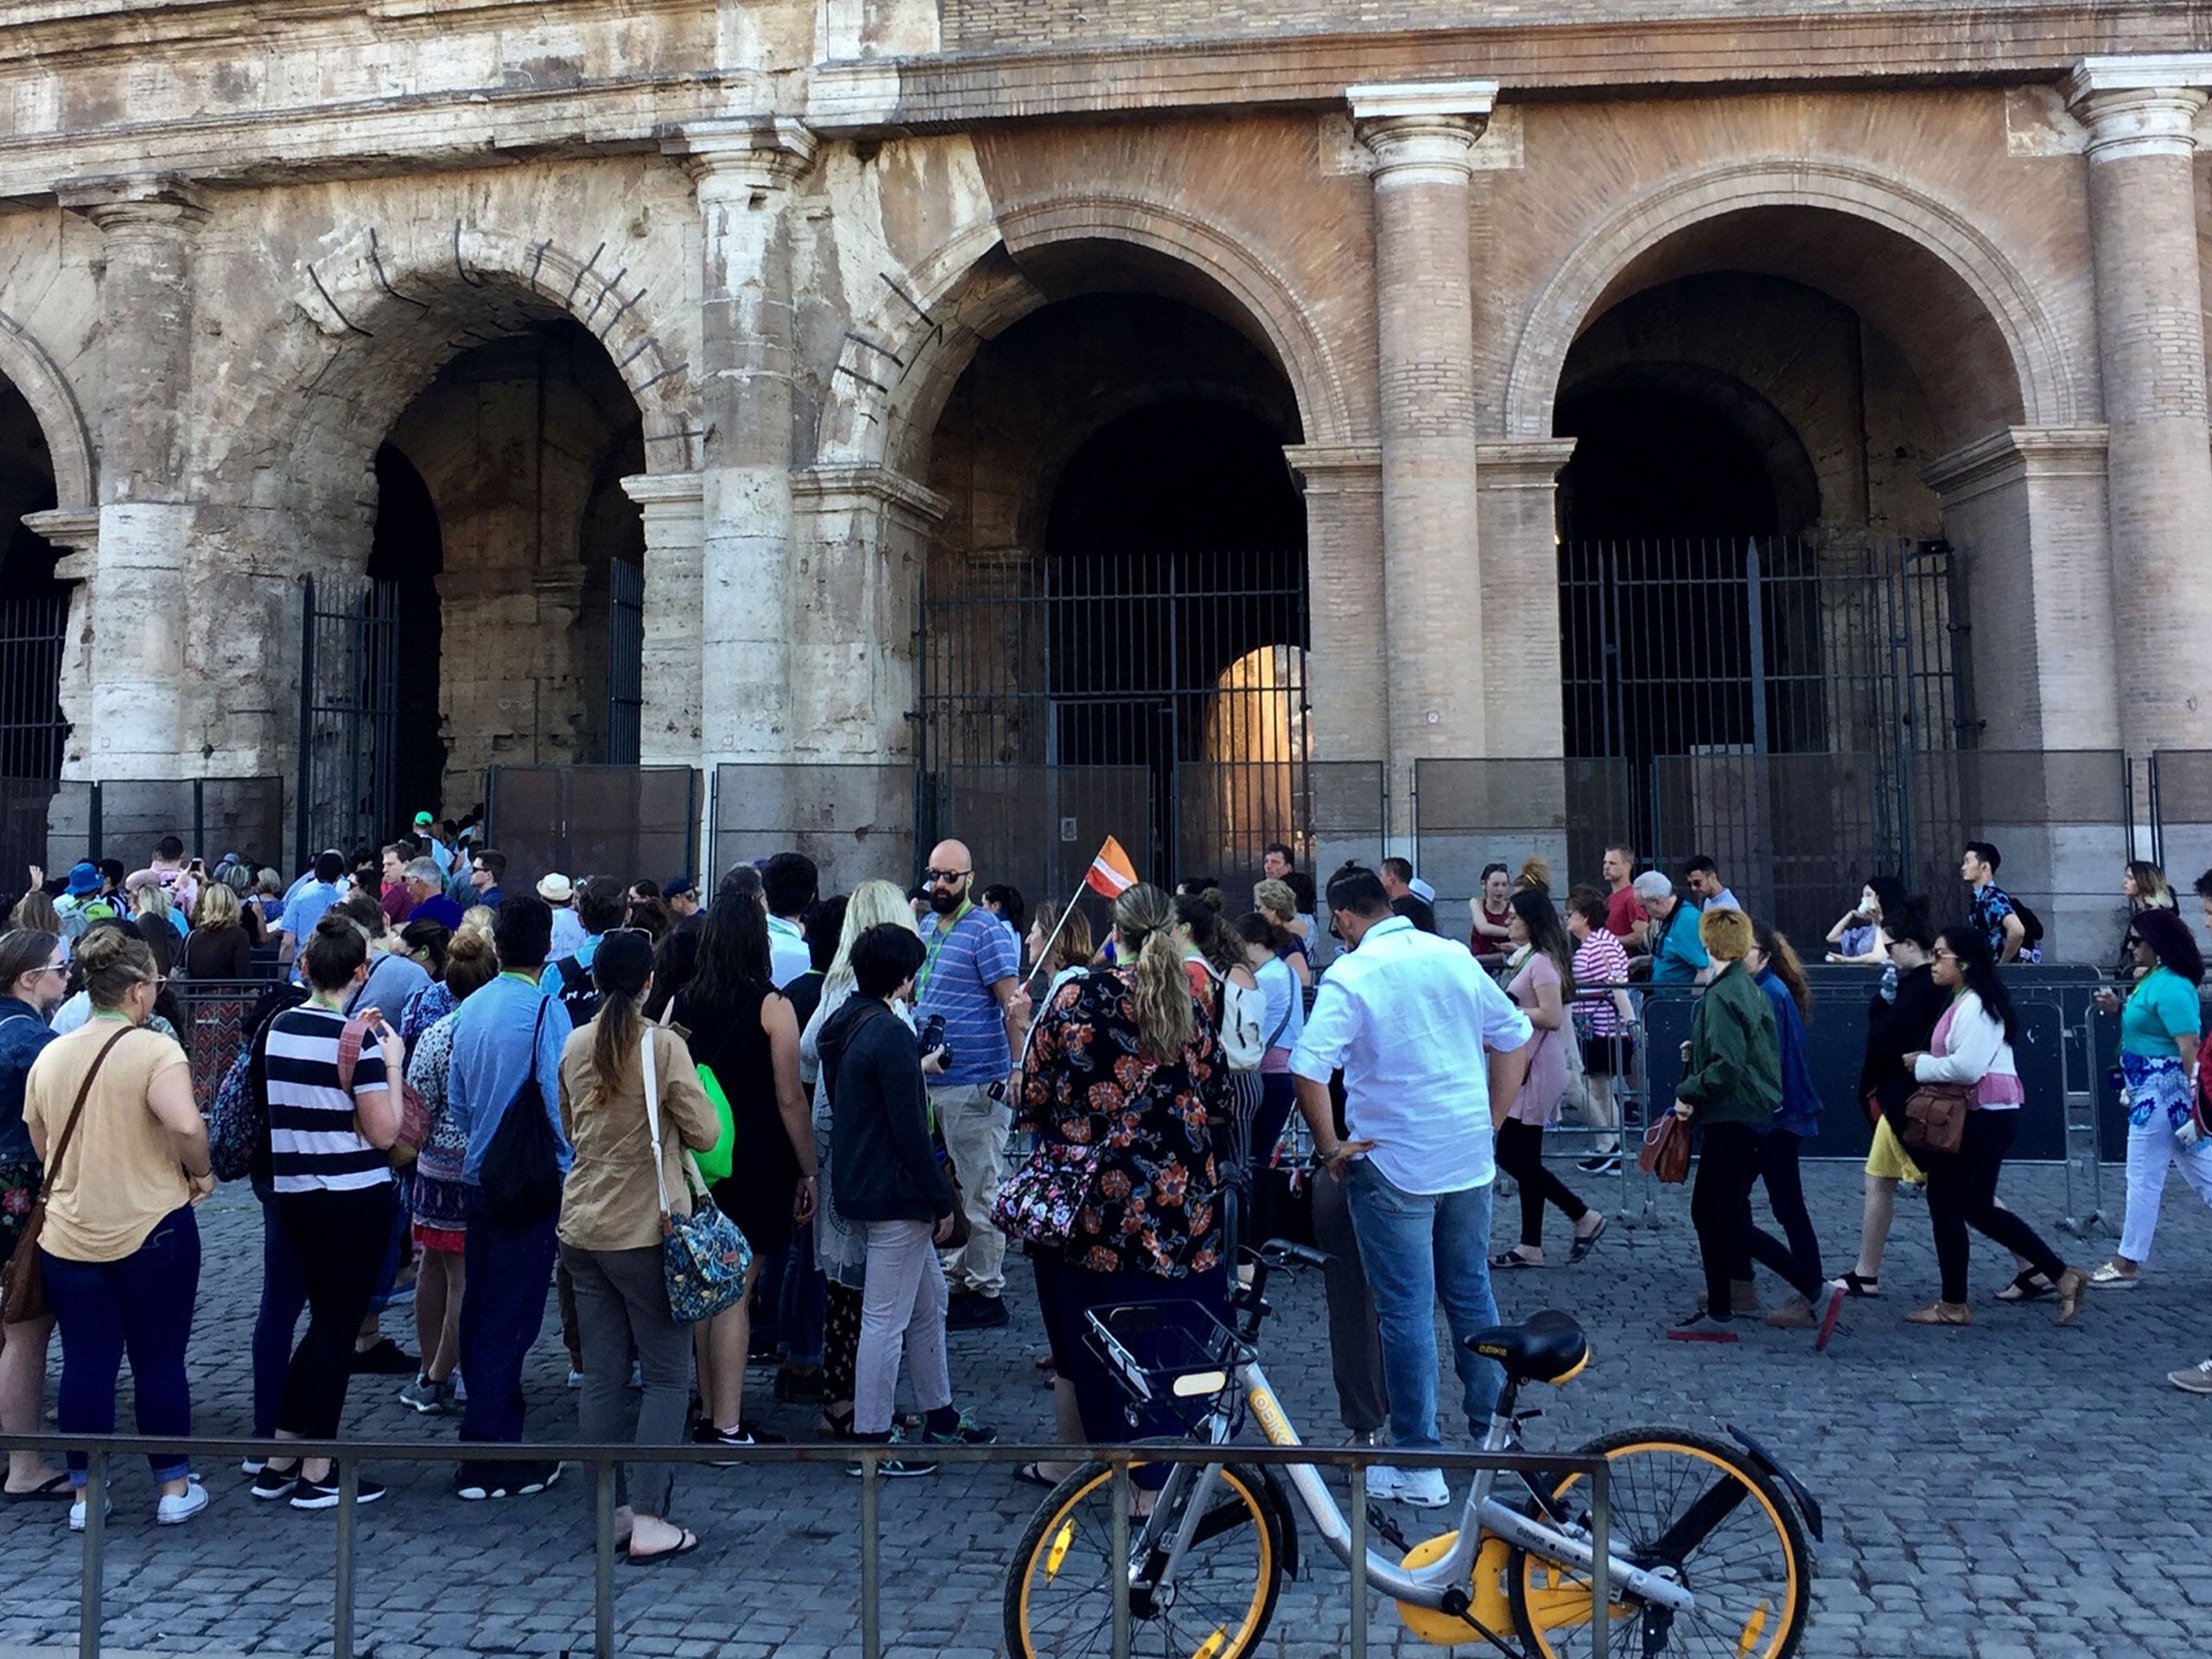 The long wait to get inside the Colosseum